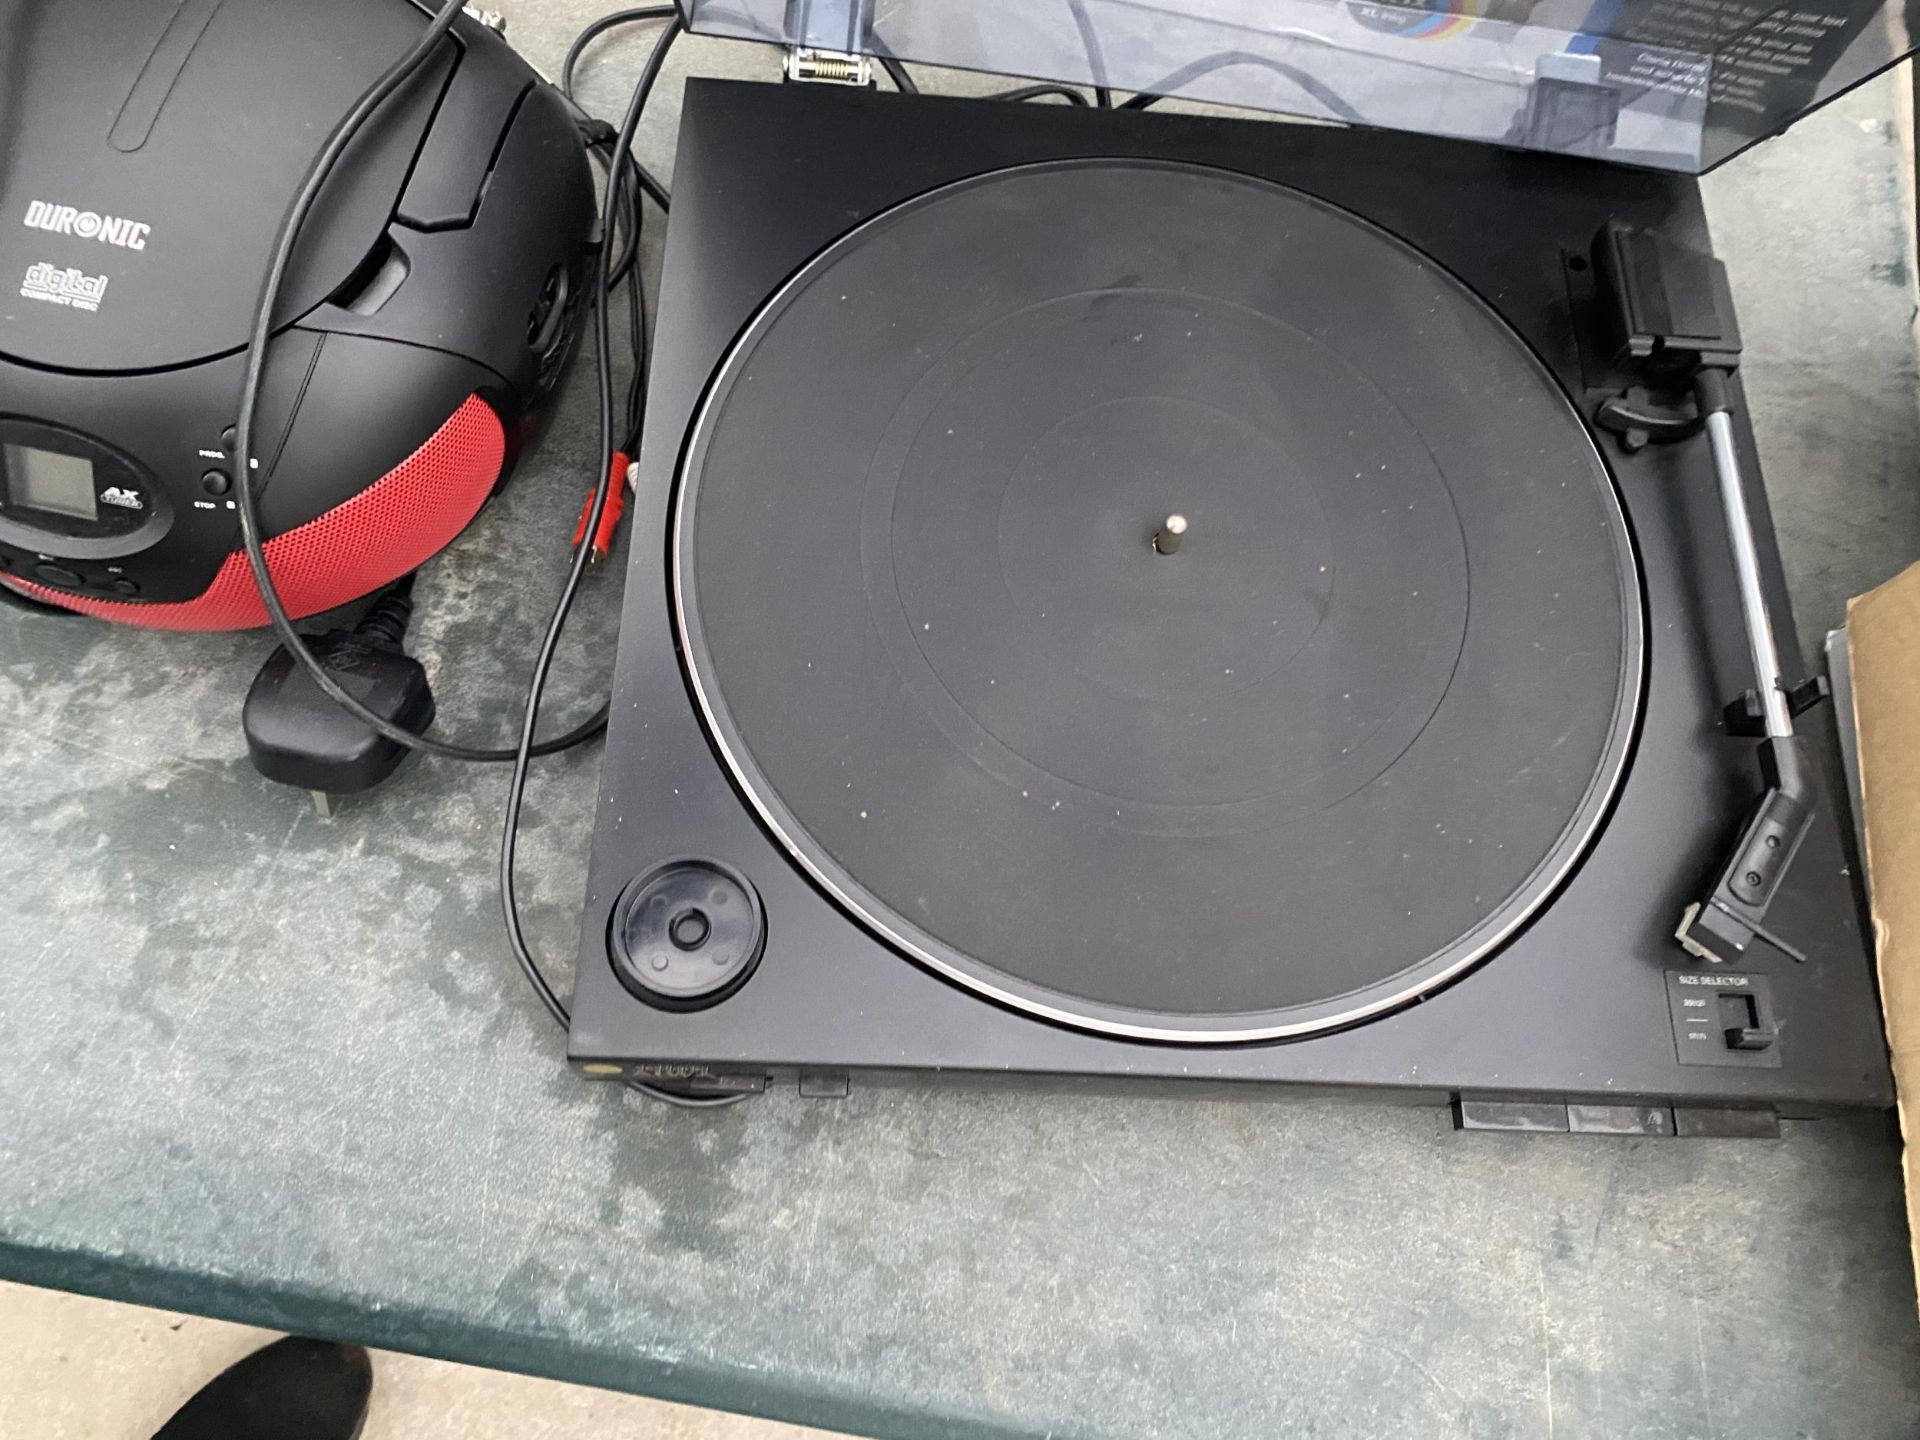 AN AIWA TURNTABLE AND A DURONIC CD PLAYER - Image 4 of 4